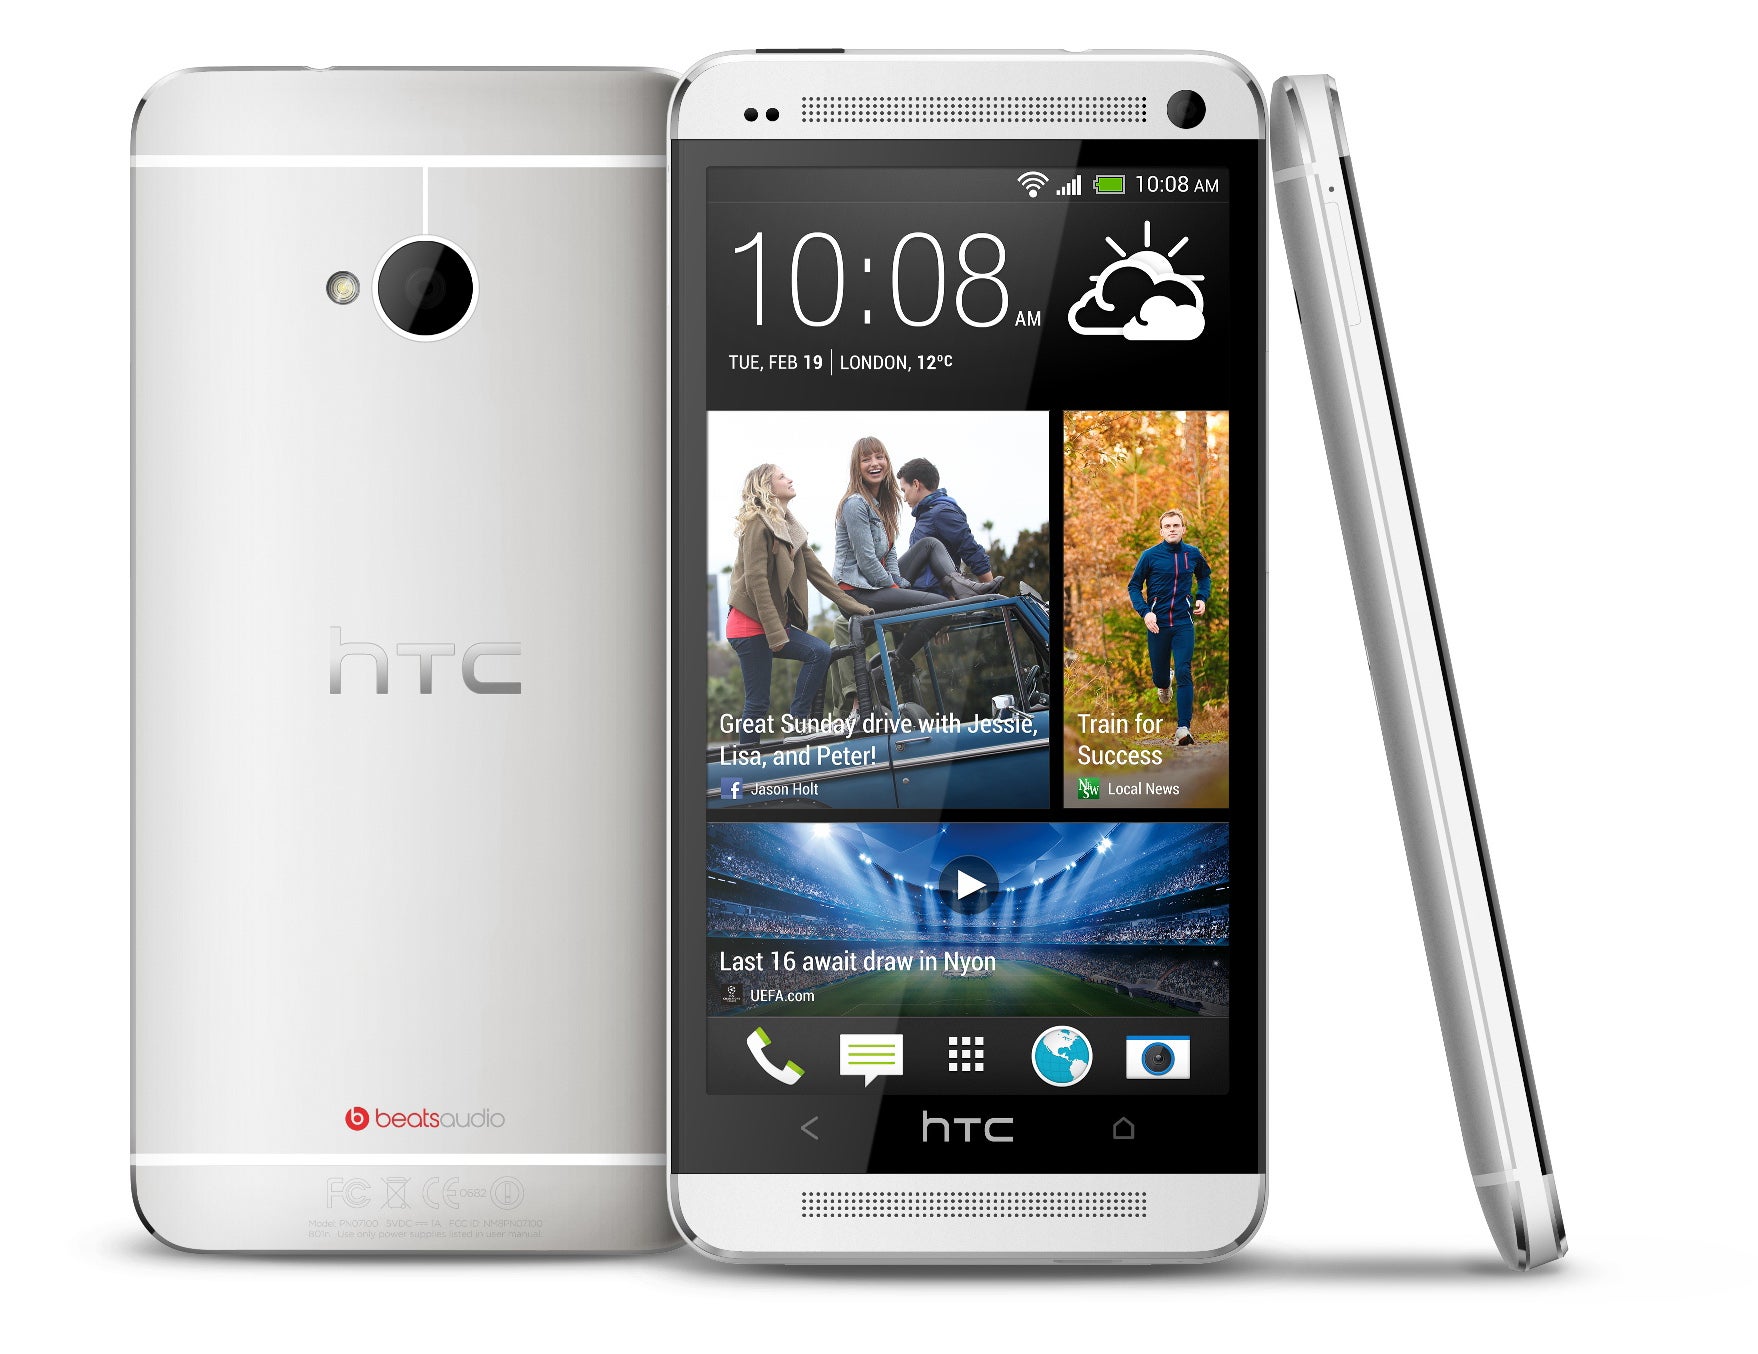 The HTC One - HDR Microphone disappears from HTC One spec sheet following court ruling